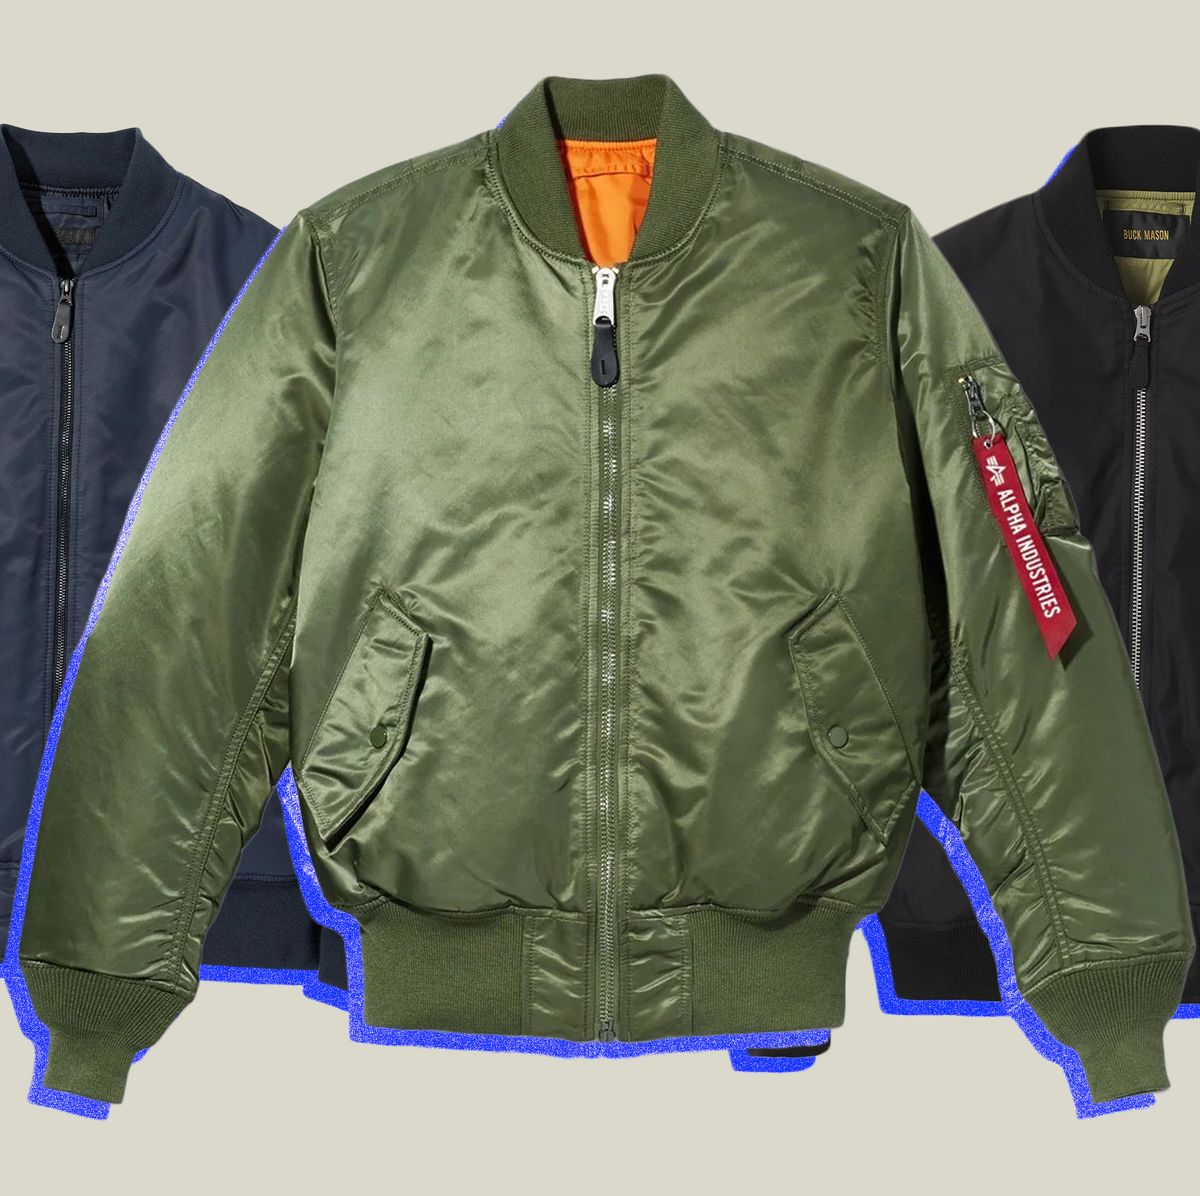 grabadora apretón sonriendo The Best Bomber Jackets for Taking Your Style to New Heights